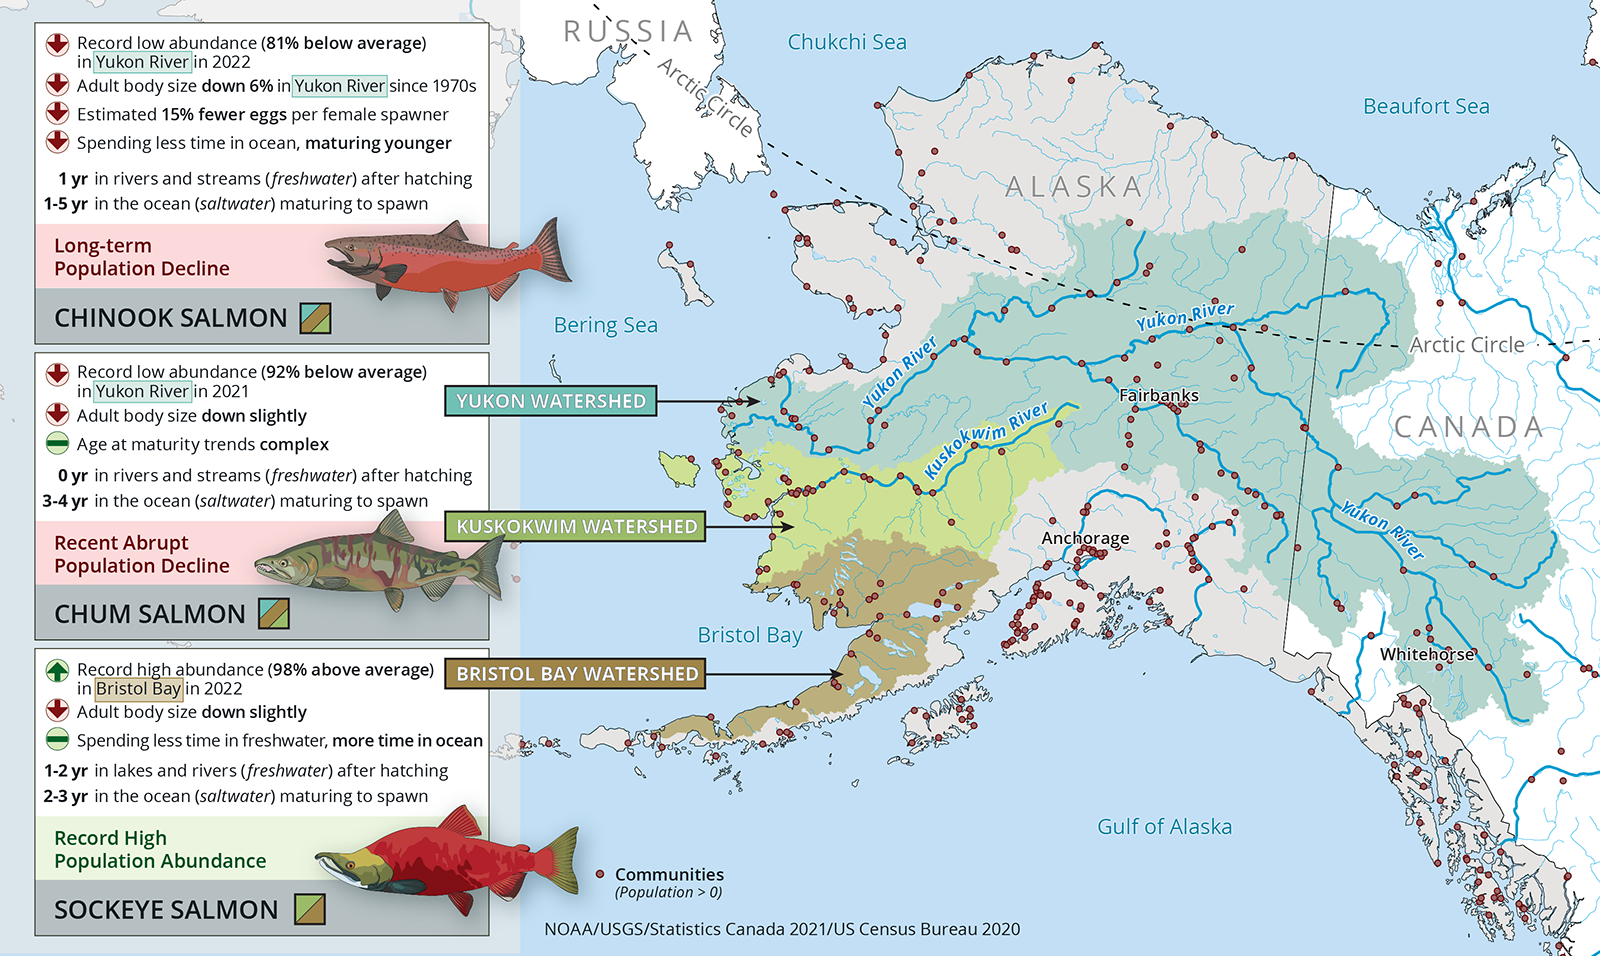 Divergent Responses of Western Alaska Salmon to a Changing Climate - NOAA  Arctic